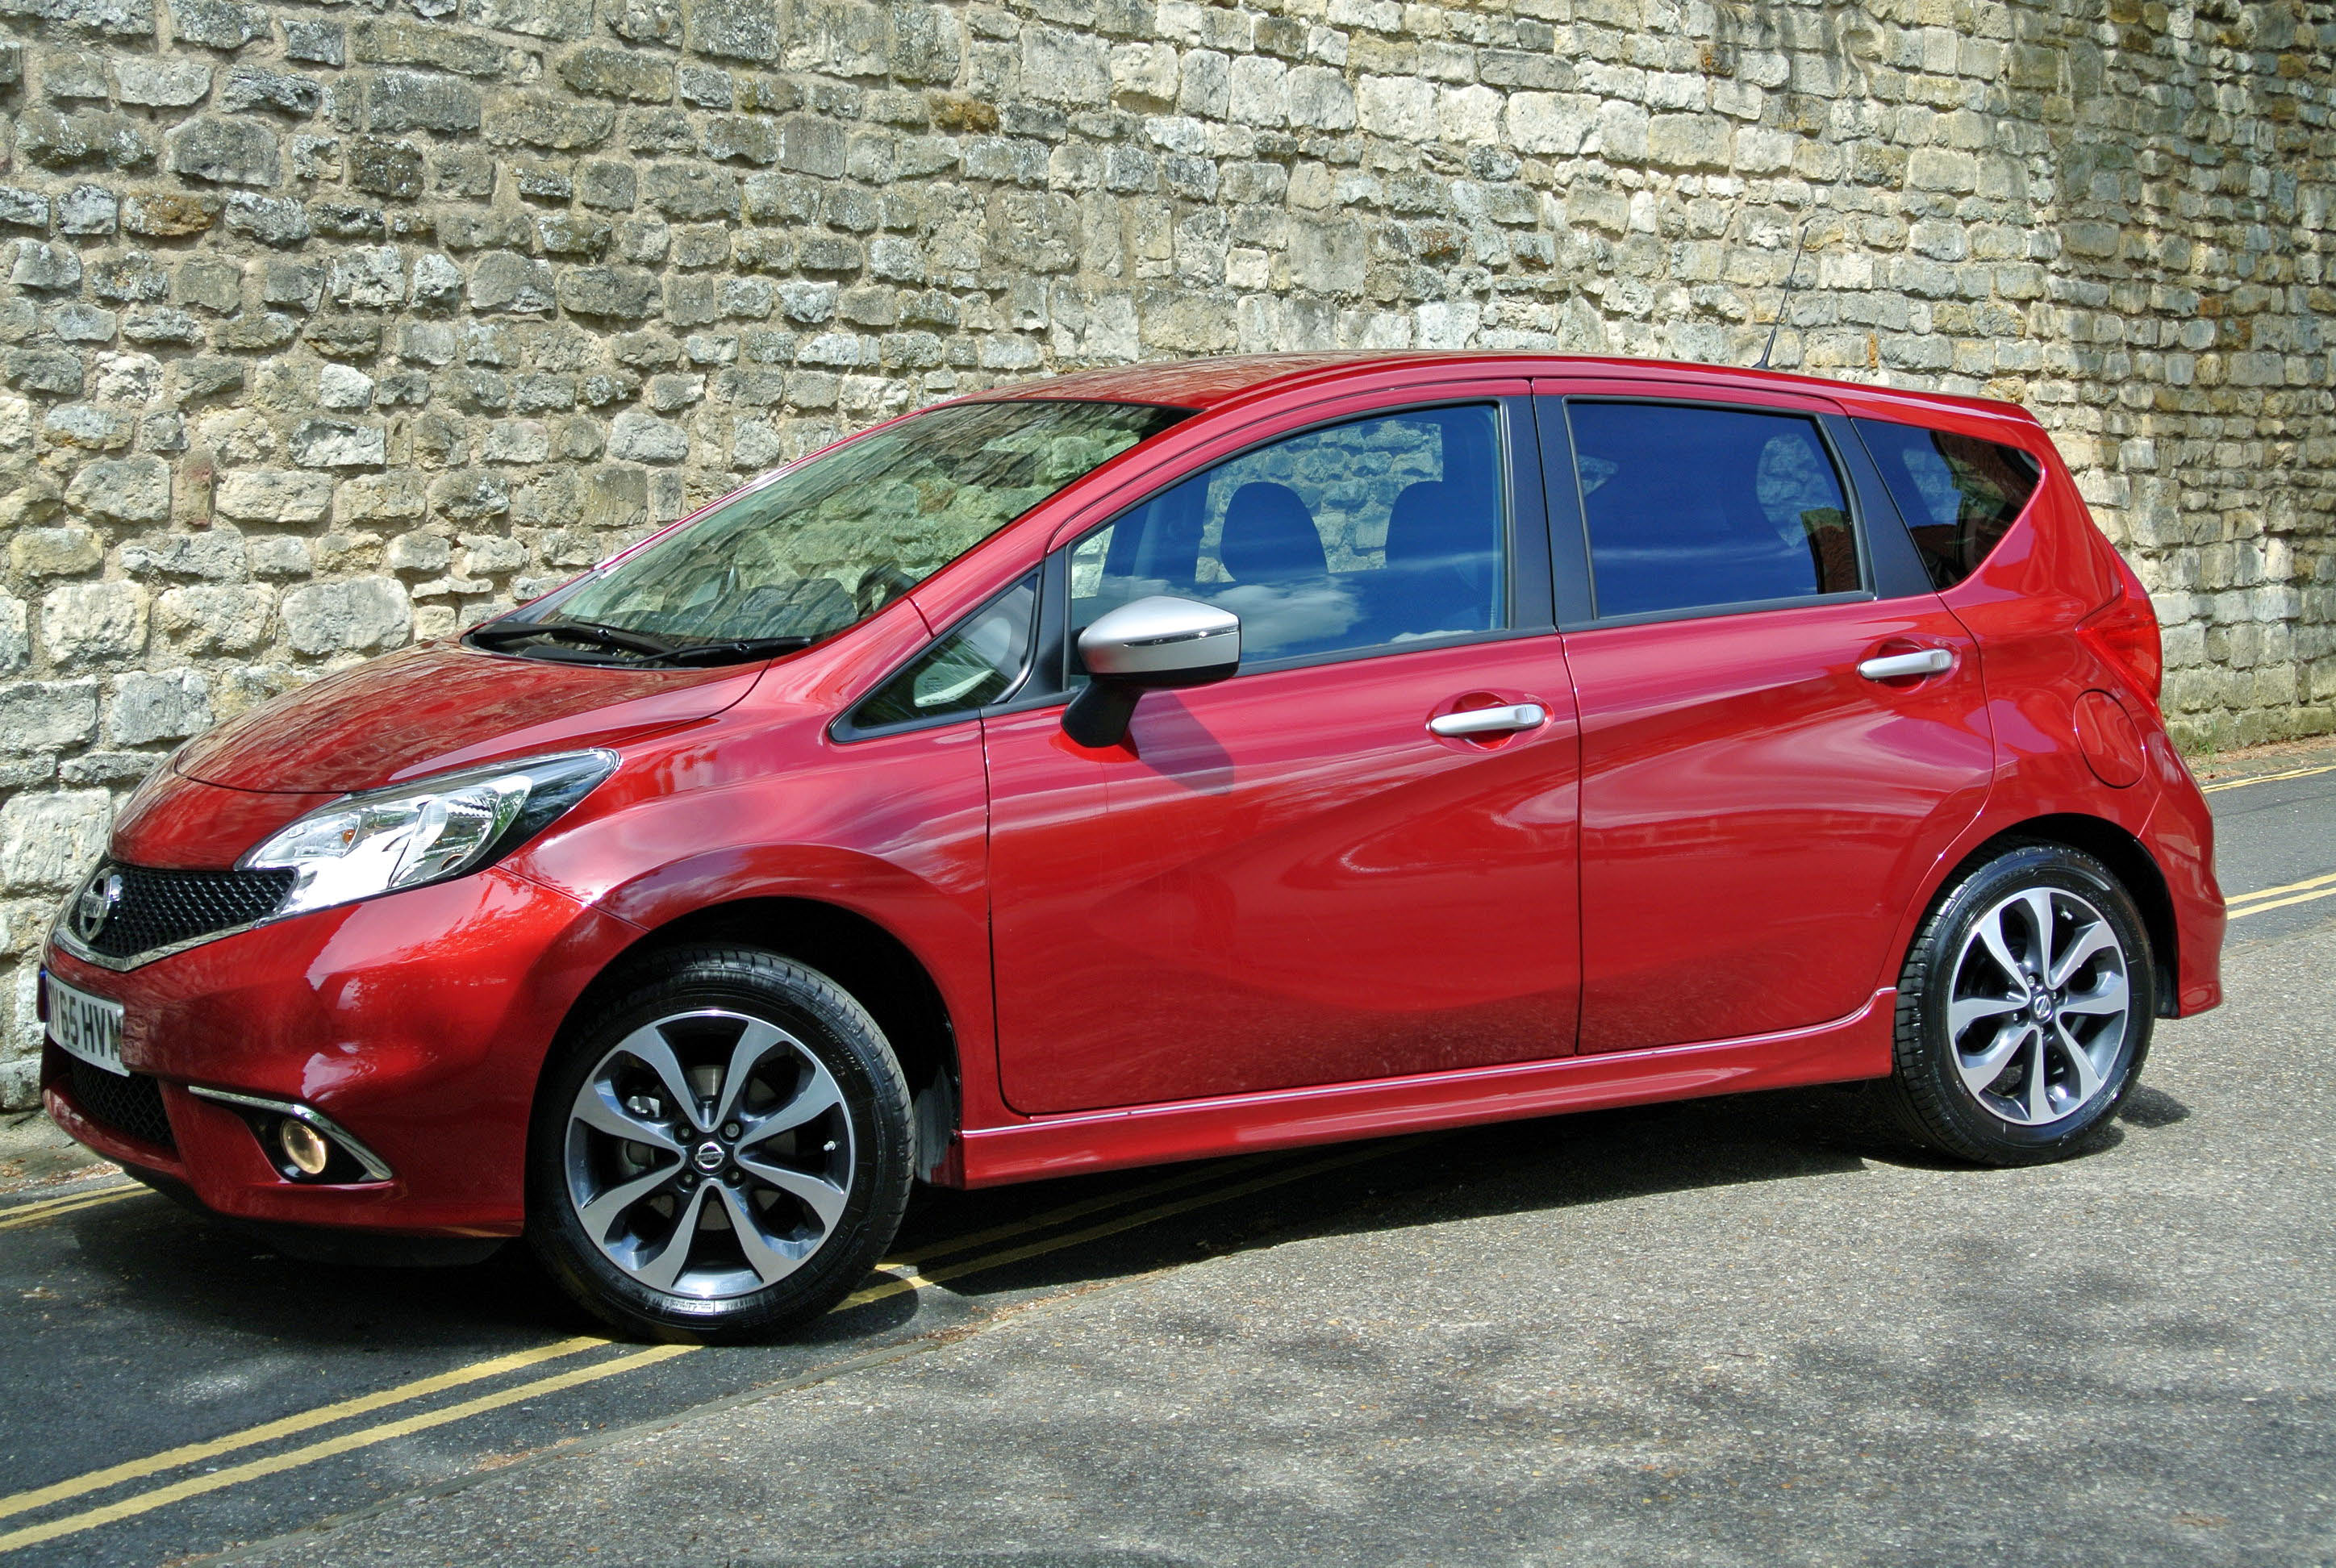 A car is a car is a car, until you discover the Nissan Note